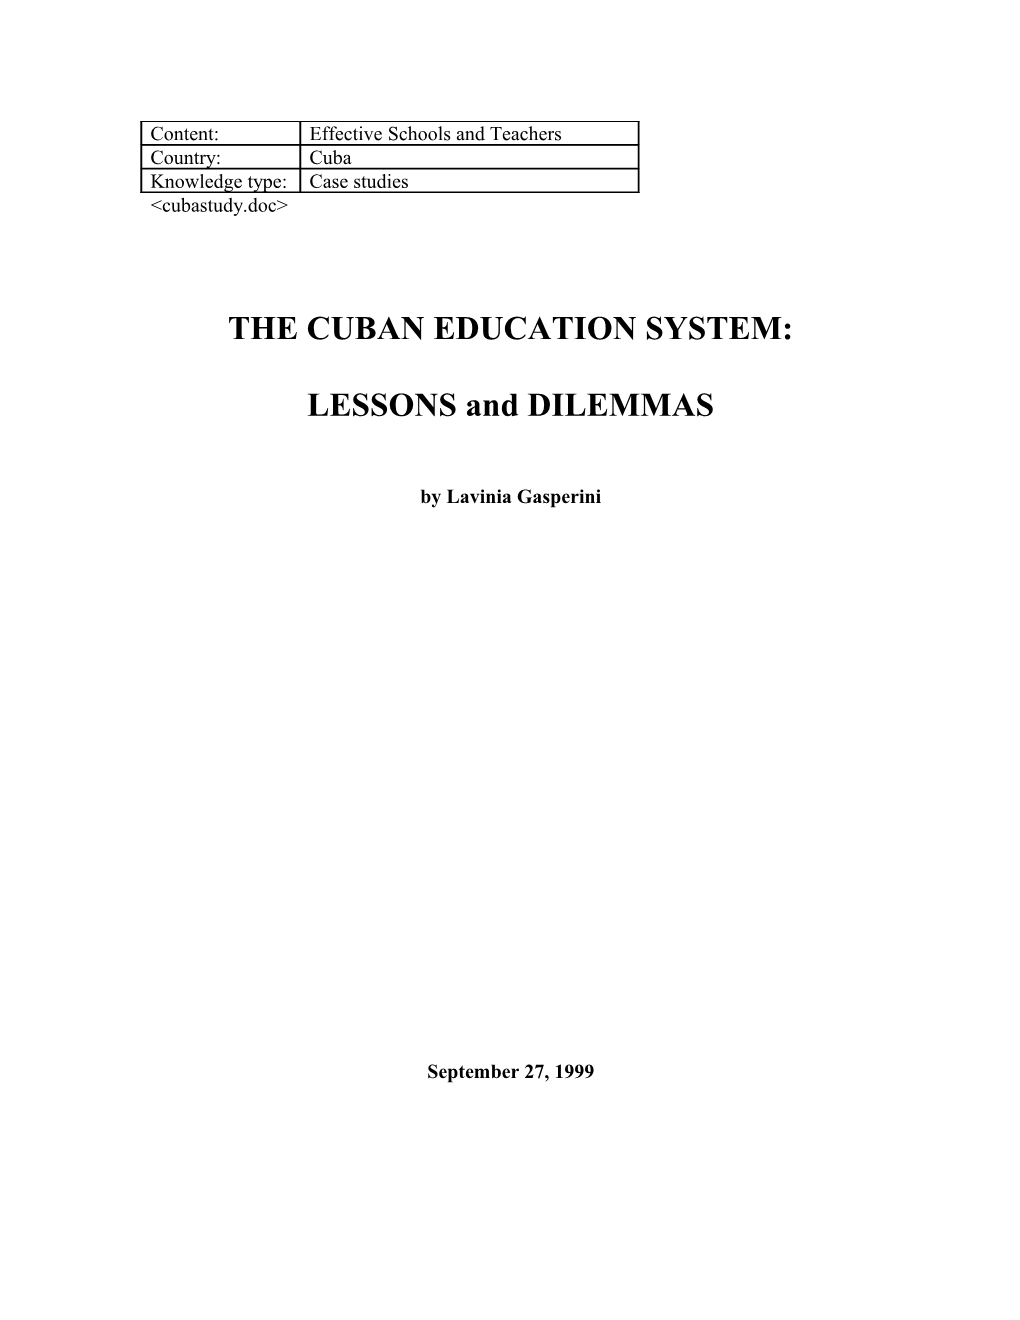 The Cuban Education System